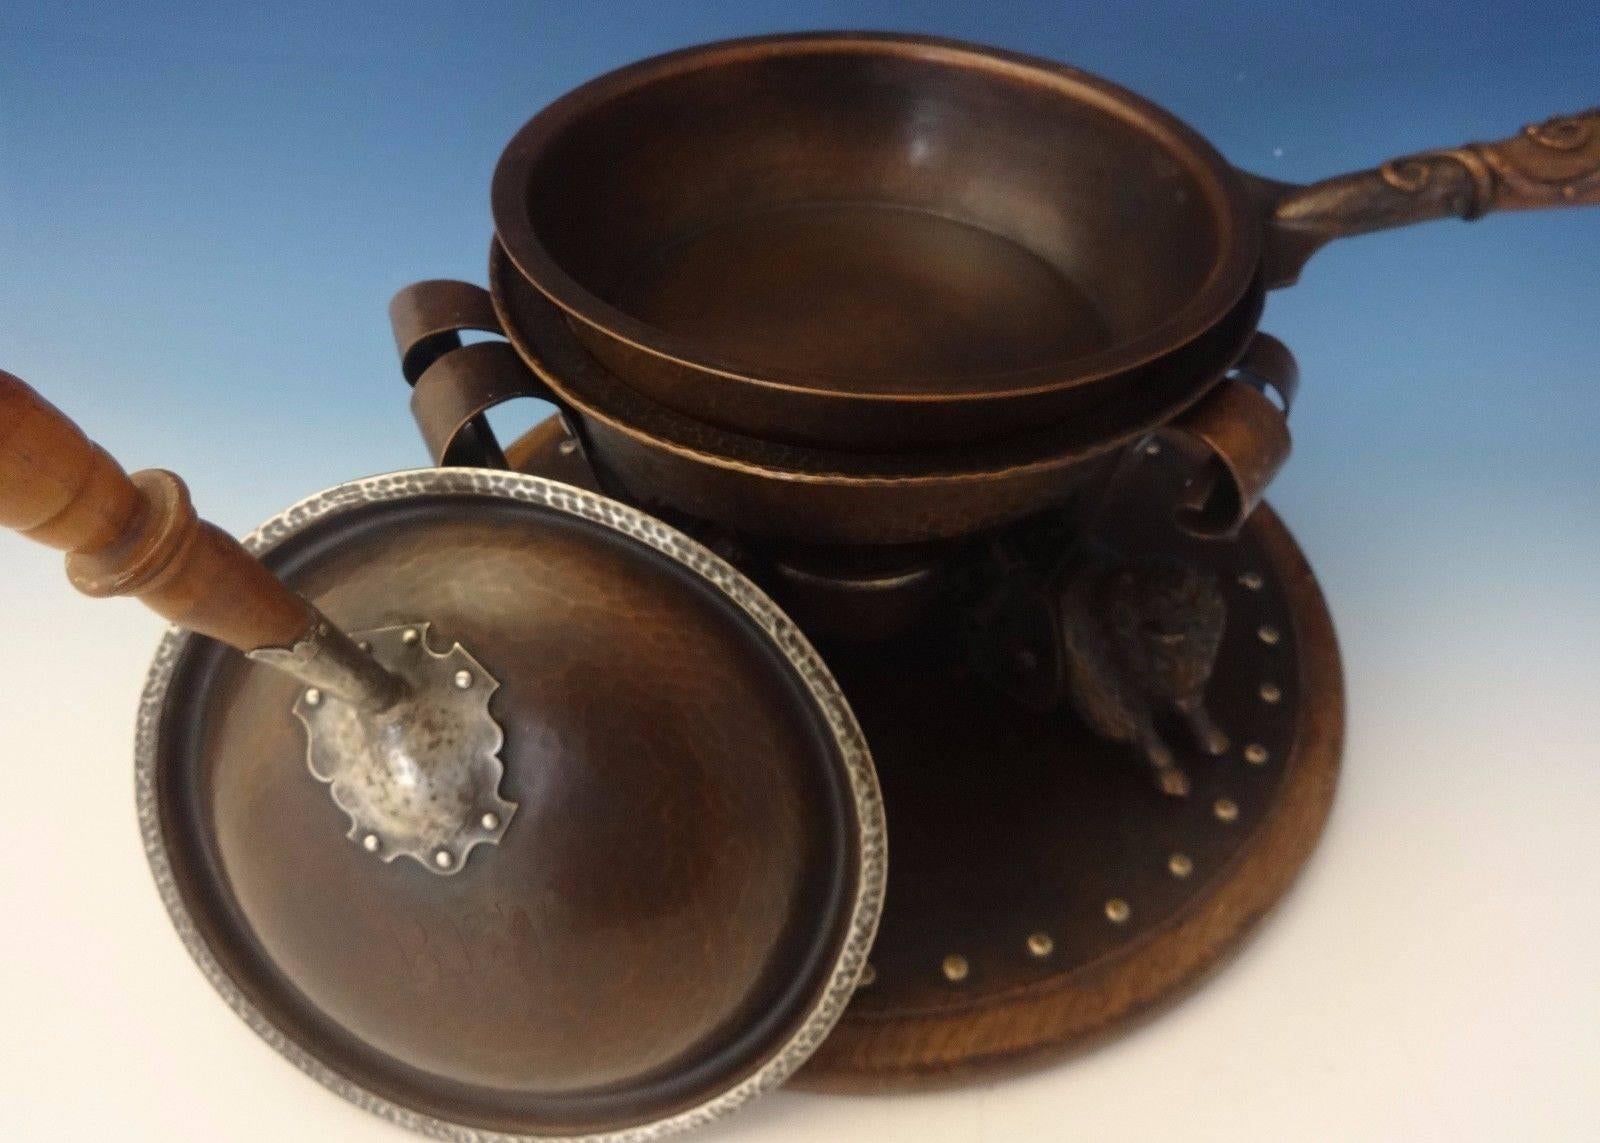 This rare Arts & Crafts silver and copper chafing dish was handmade by Joseph Heinrichs. This piece features three 3-D buffalo with a copper and sterling pot. It has applied copper on wood handles. It also includes an underplate with wood